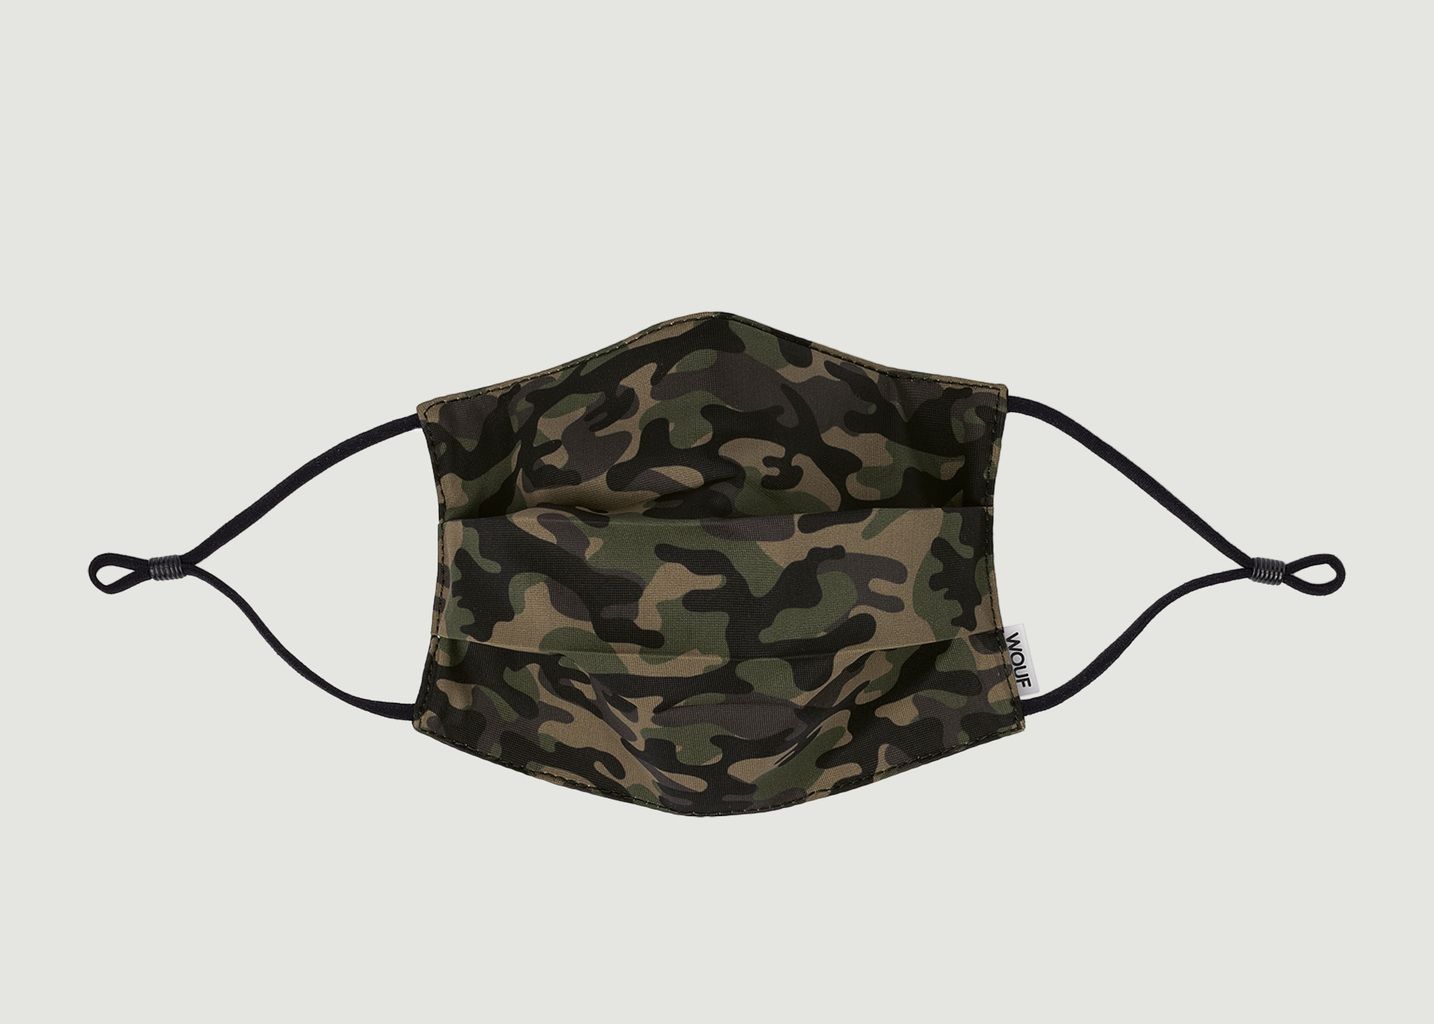 wouf-camouflage-mask-2-filters